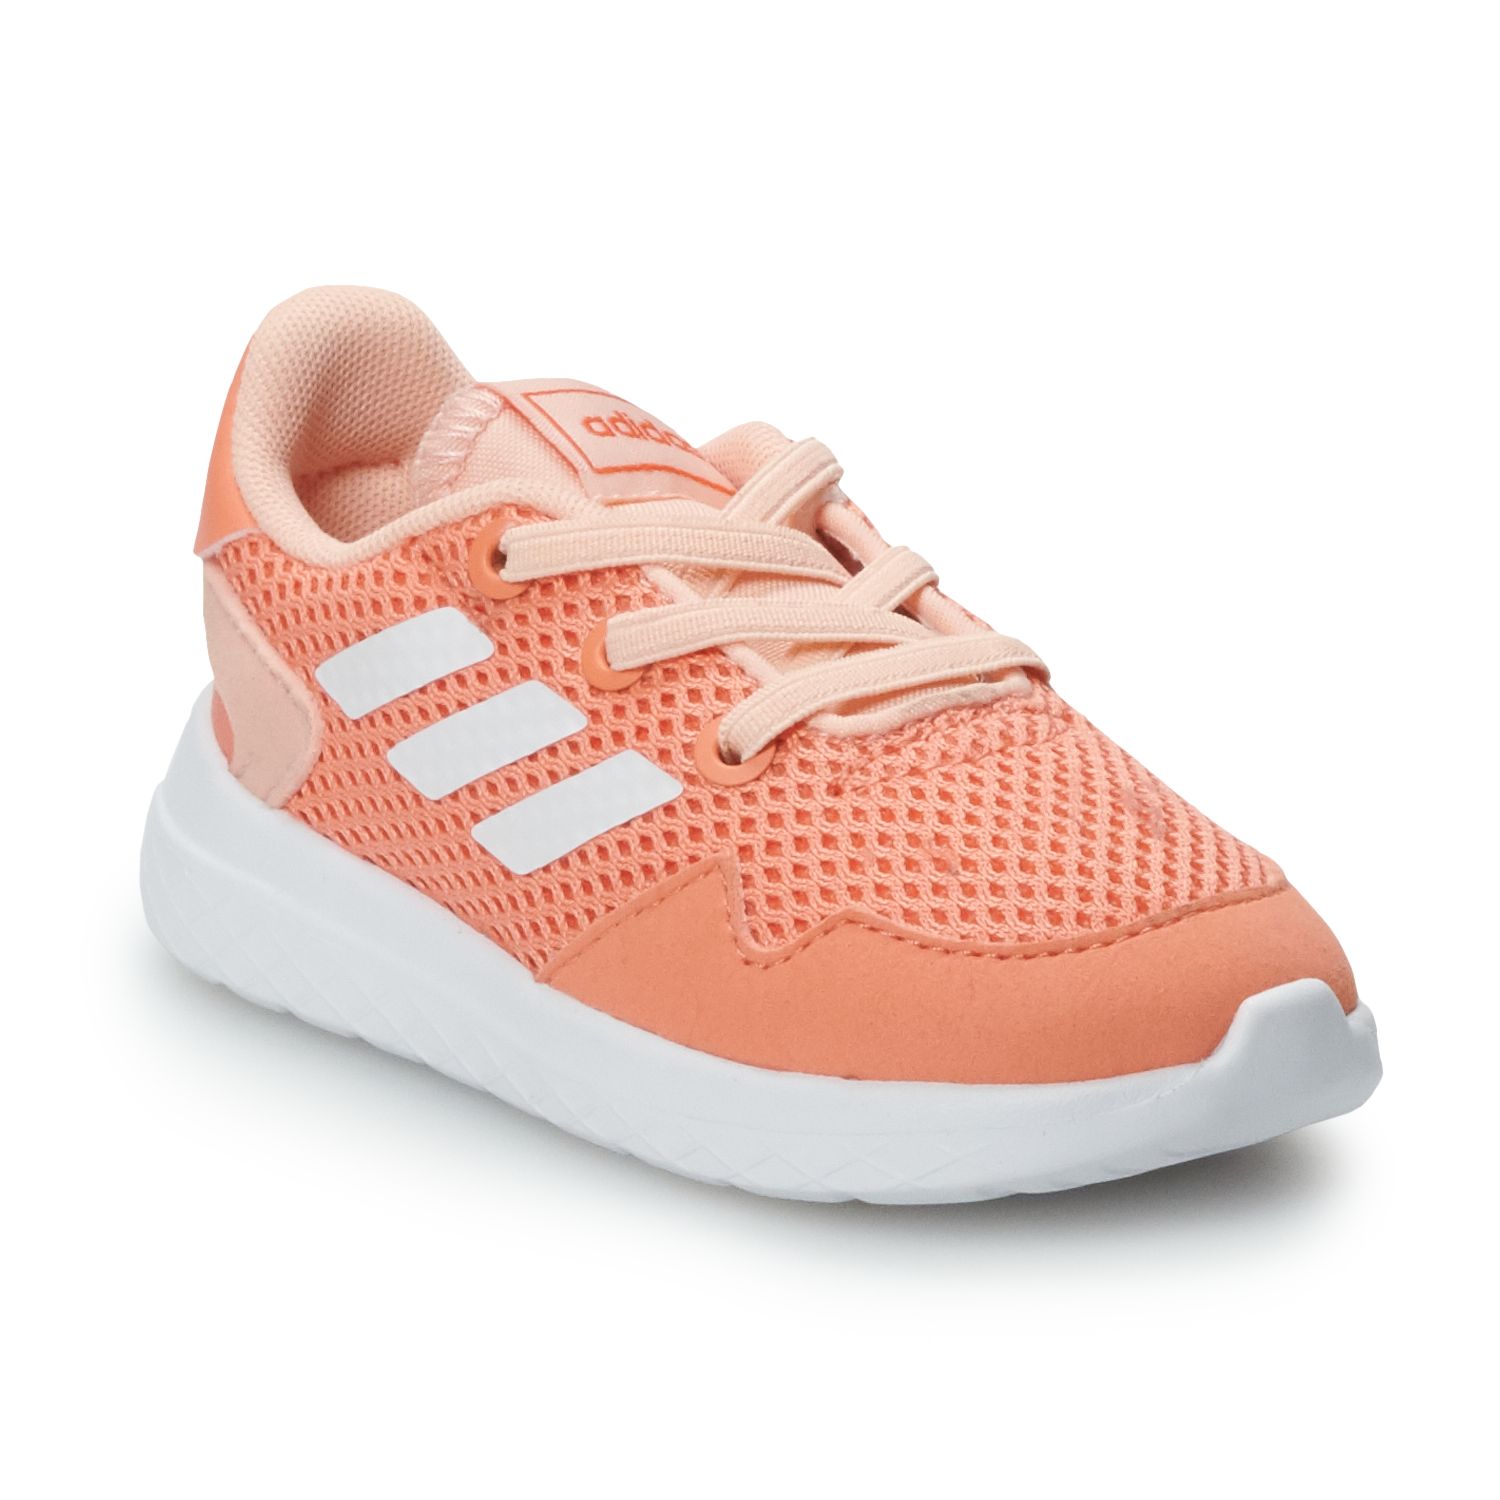 adidas shoes for toddler girls